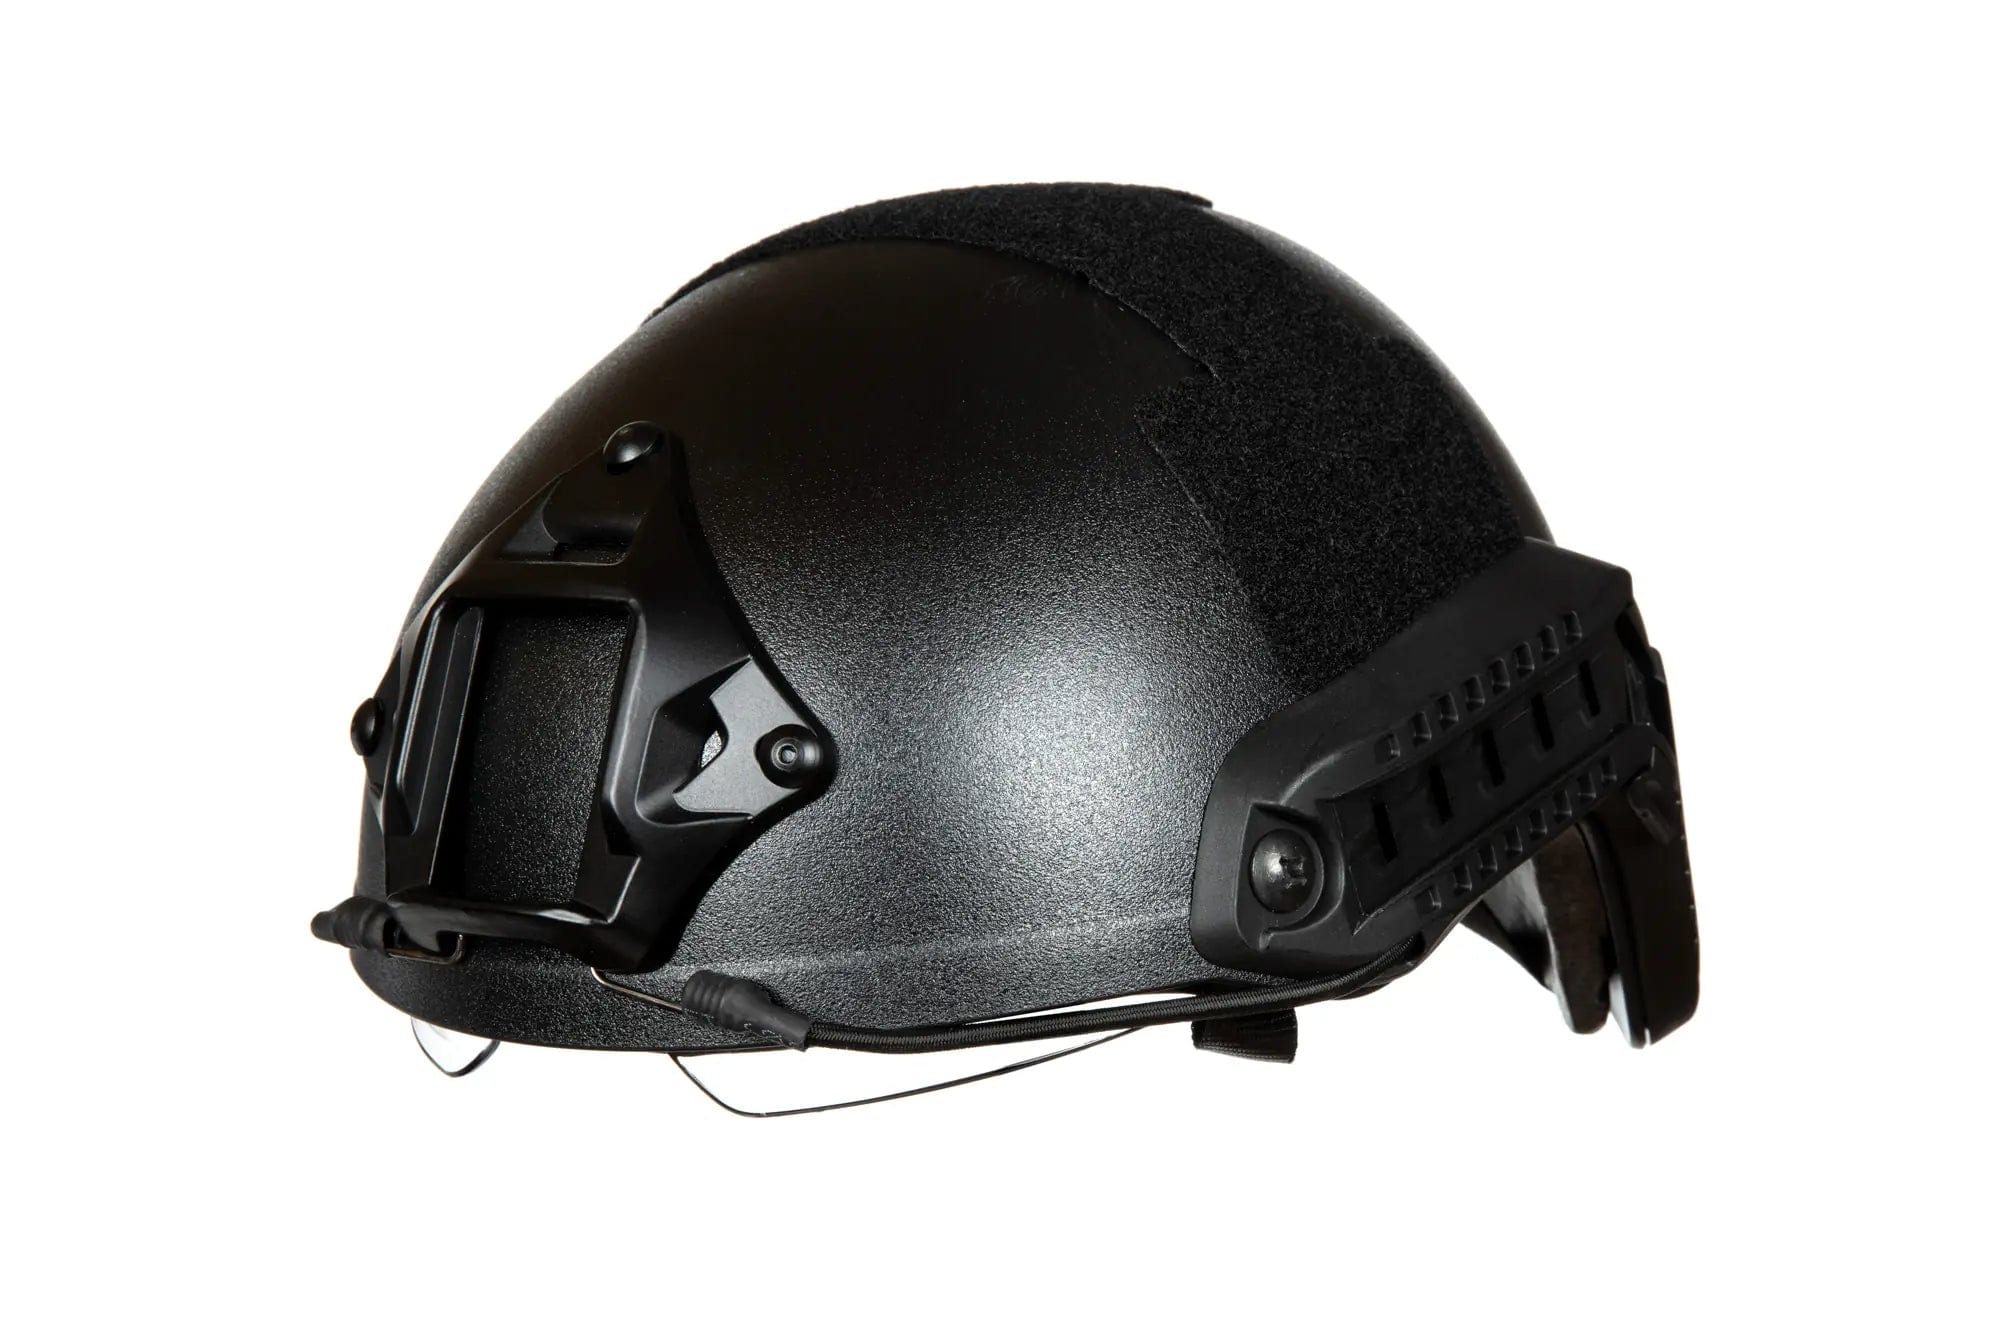 X-Shield MH Helmet With Goggles - Black